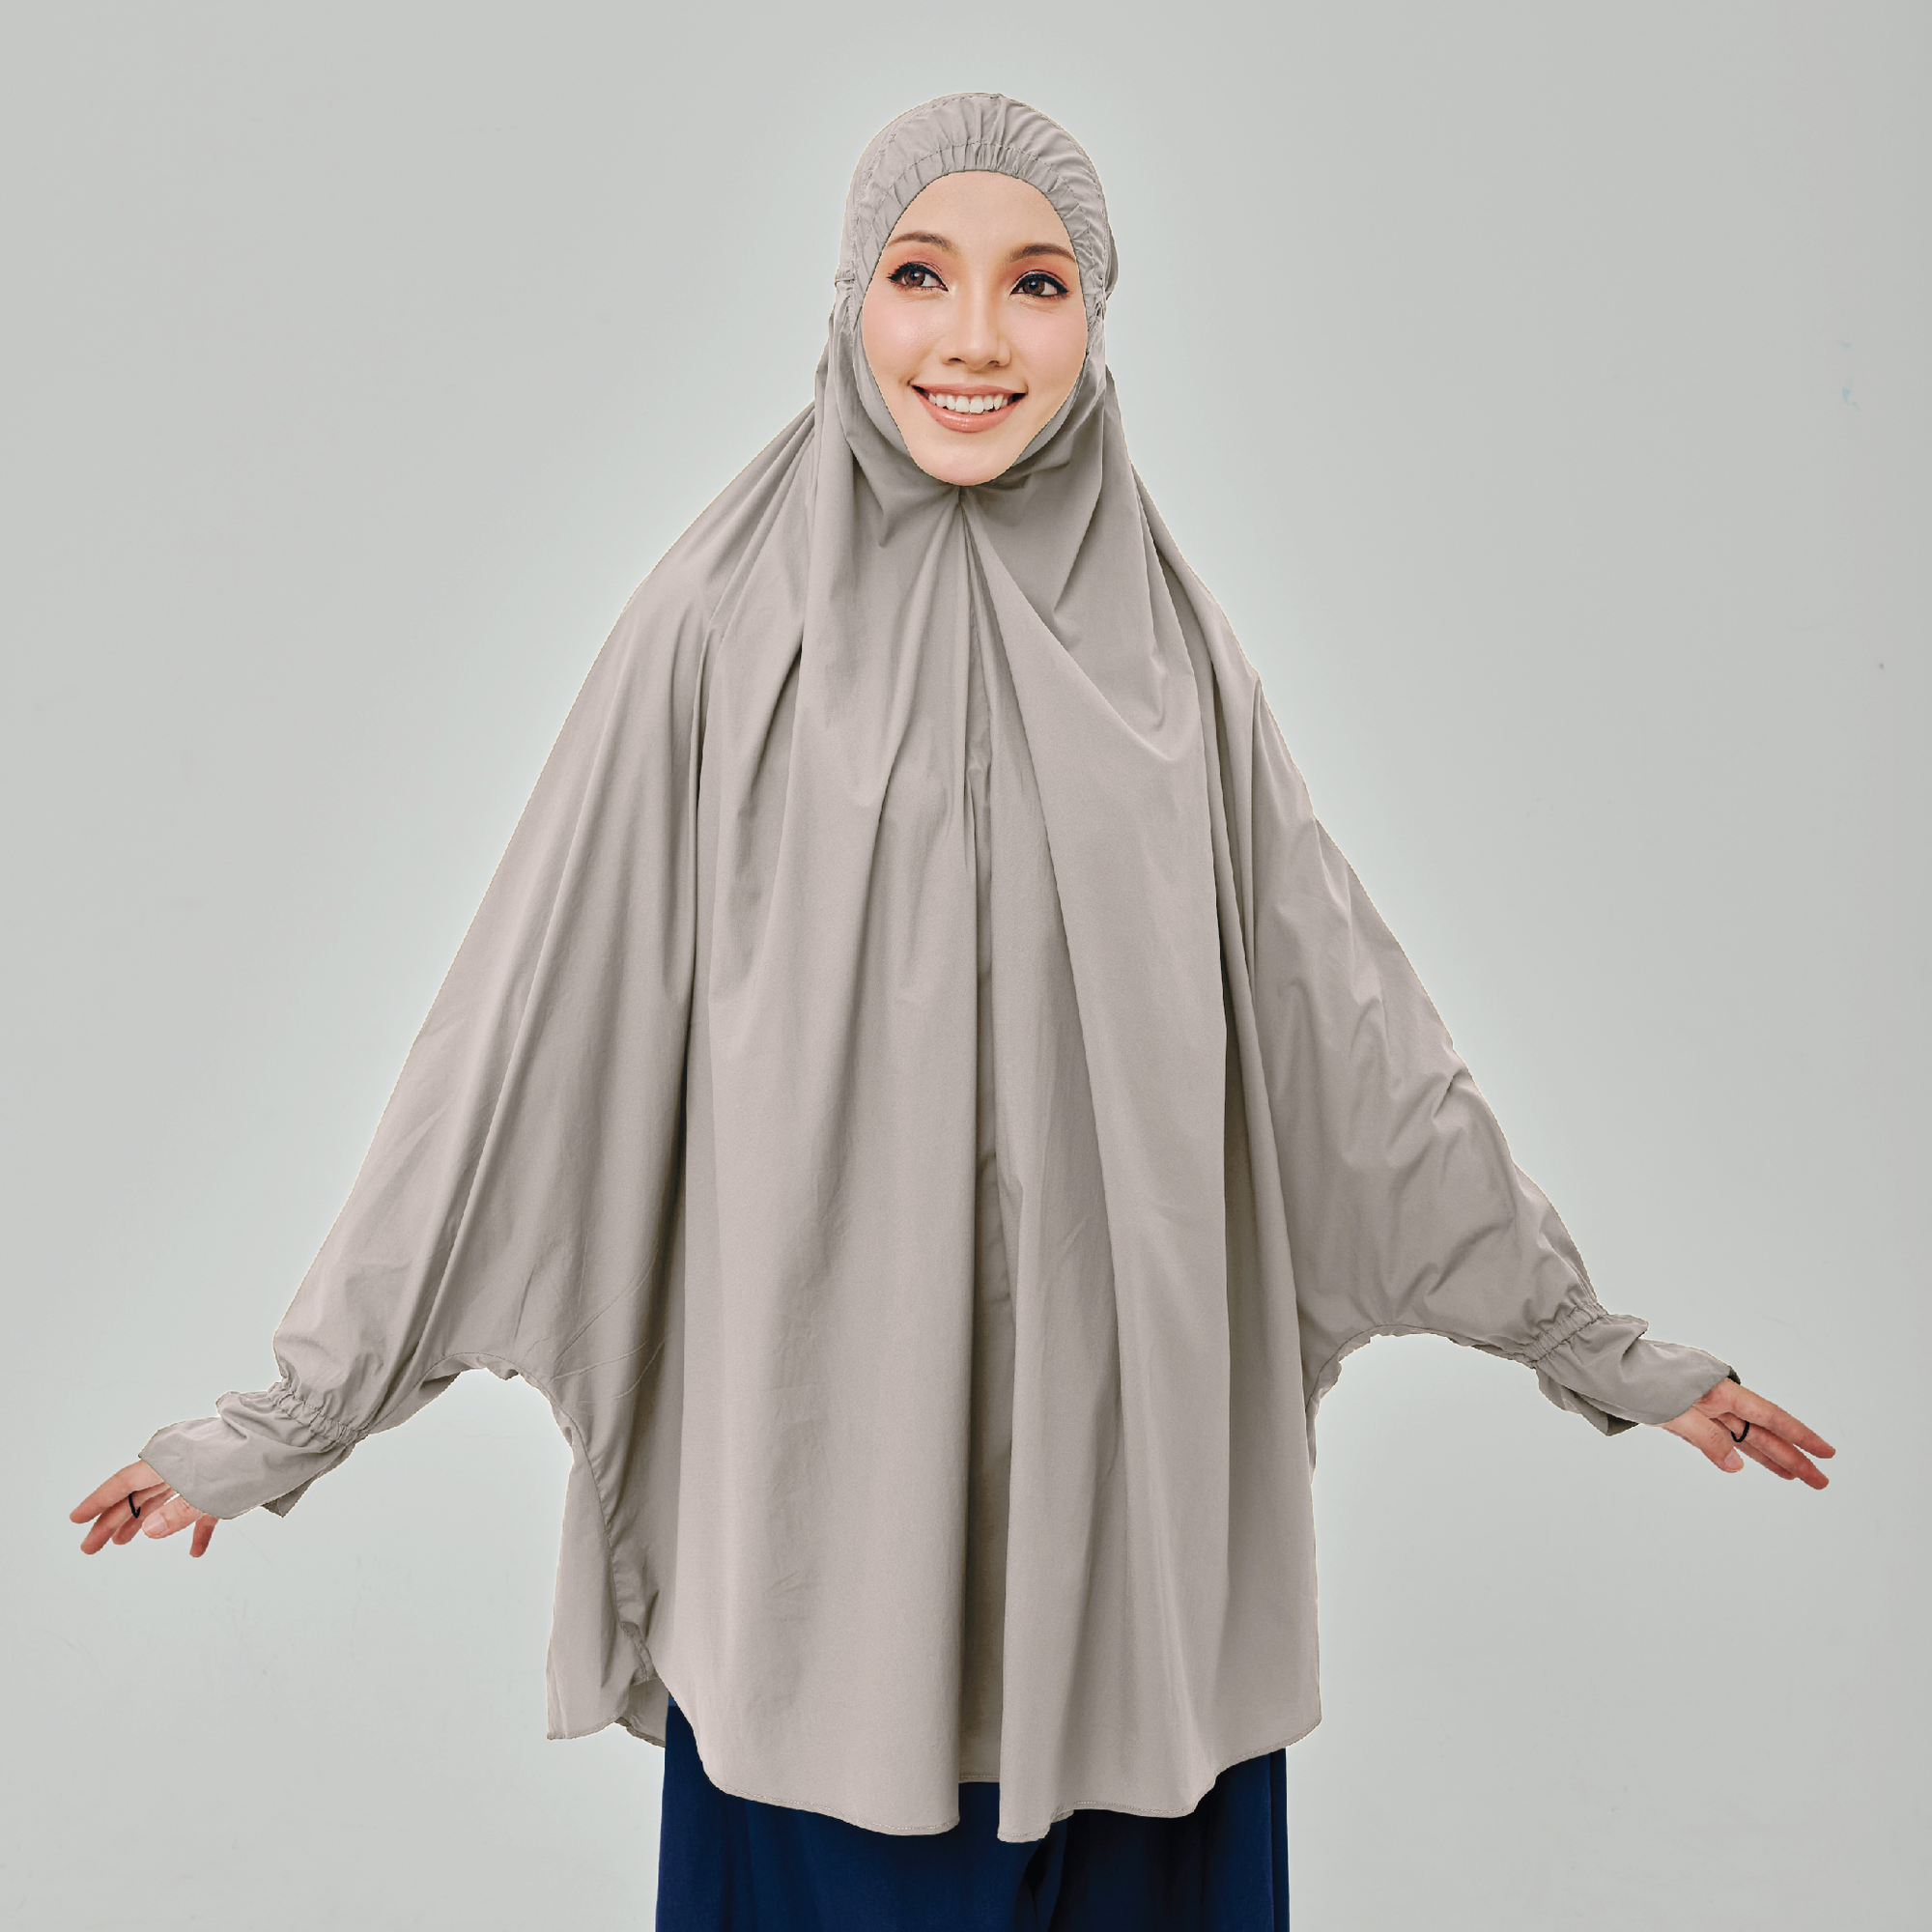 On-The-Go Prayerwear - Marisa Sleeved in Silver Grey (Top only with Sleeve)